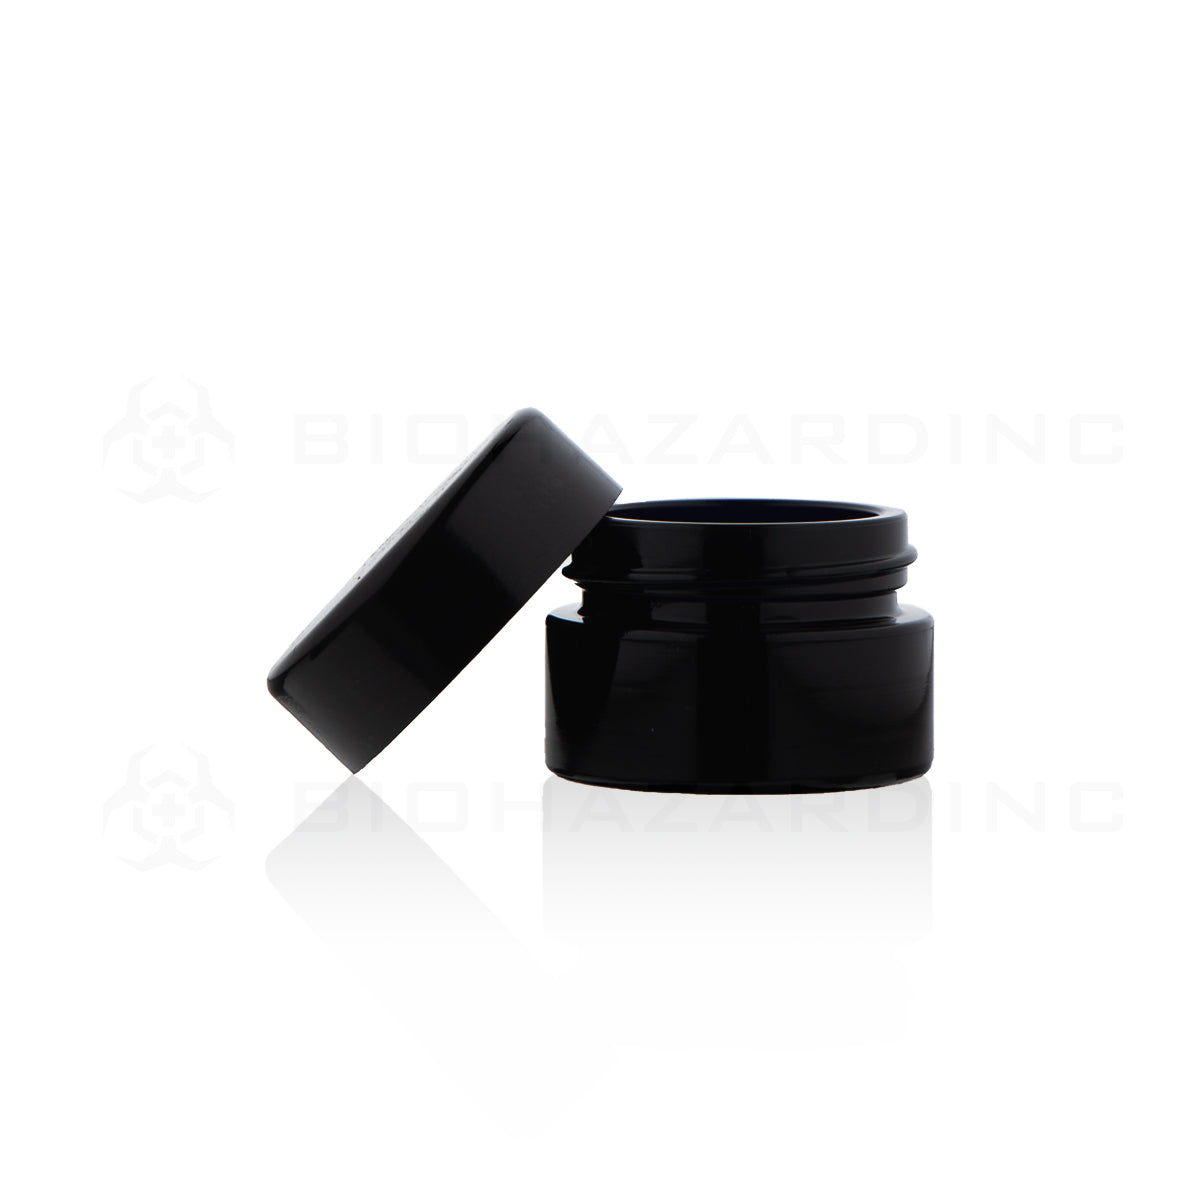 Concentrate Containers | UV Round Glass Concentrate Jars w/ Caps | 5mL - Opaque Black - 95 Count Concentrate Container Biohazard Inc   